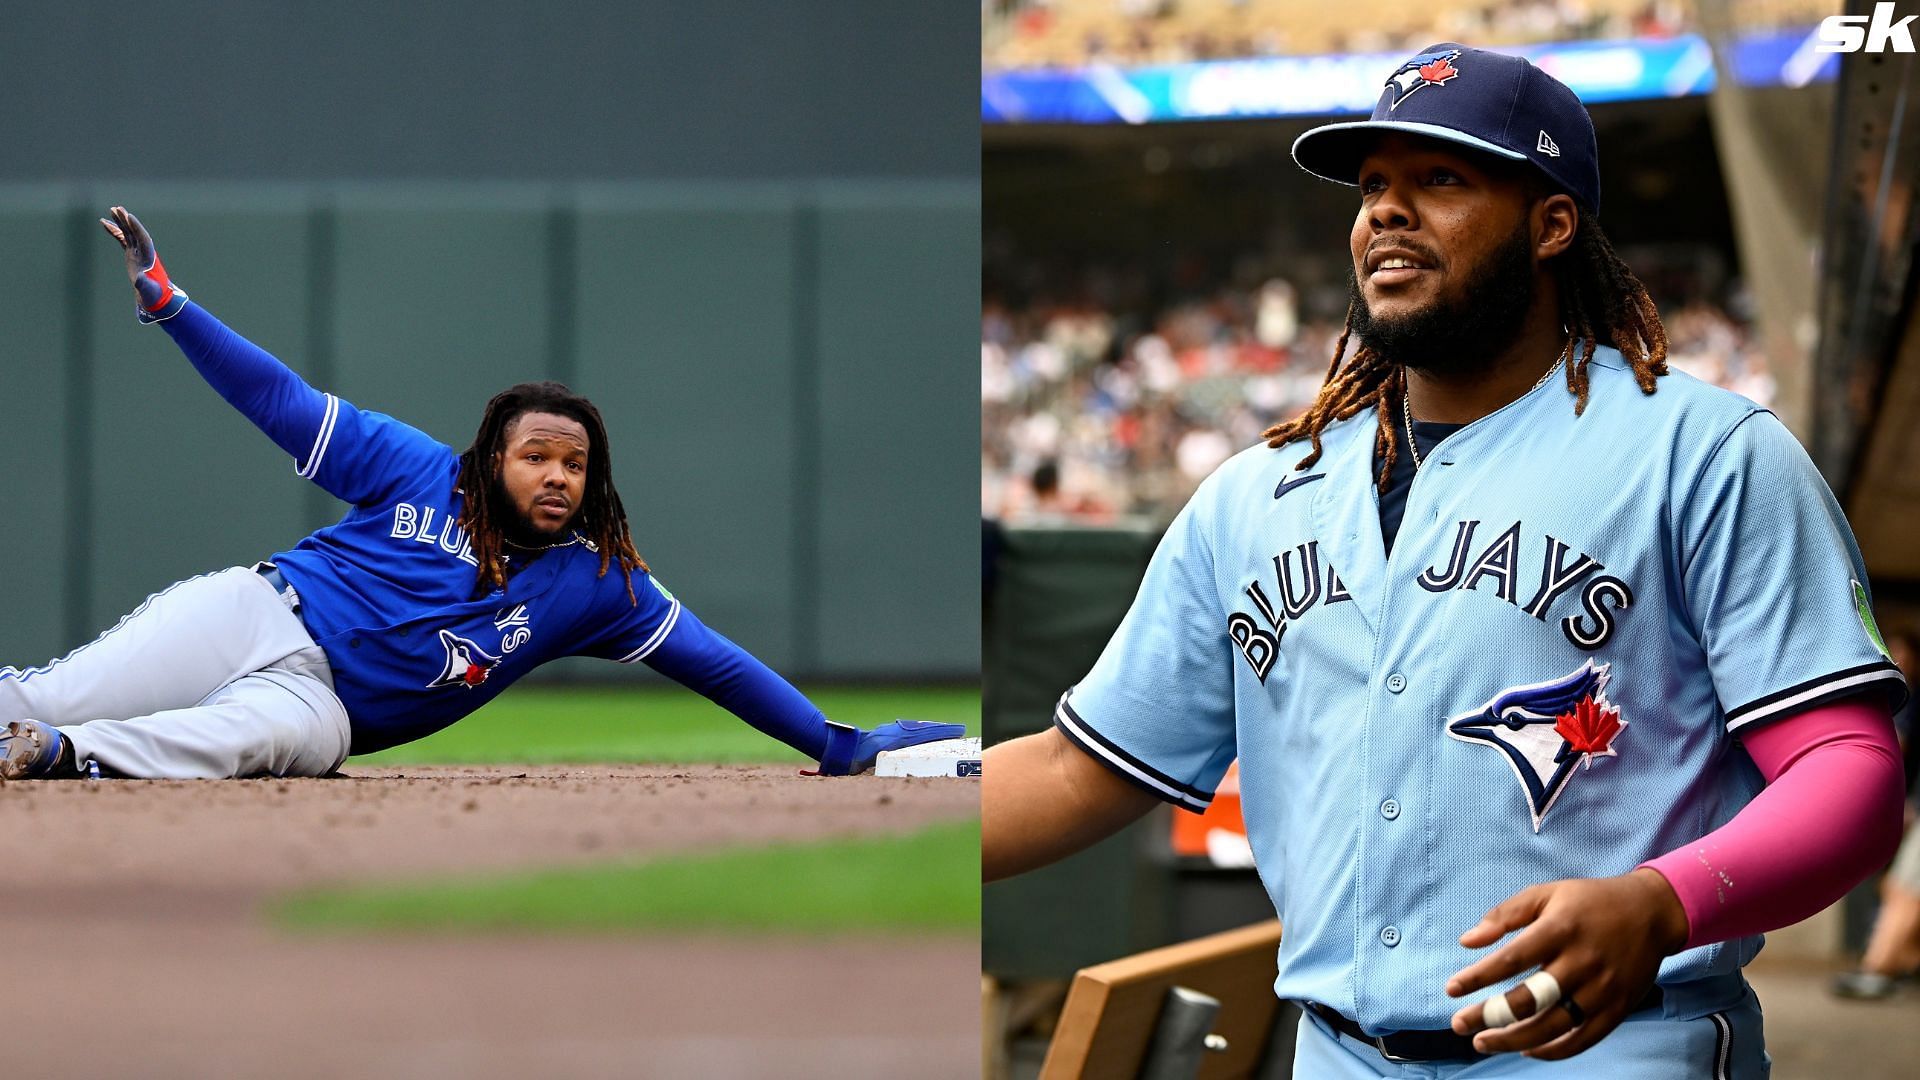 Vladimir Guerrero Jr. of the Toronto Blue Jays looks on prior to Game One of the Wild Card Series against the Minnesota Twins at Target Field